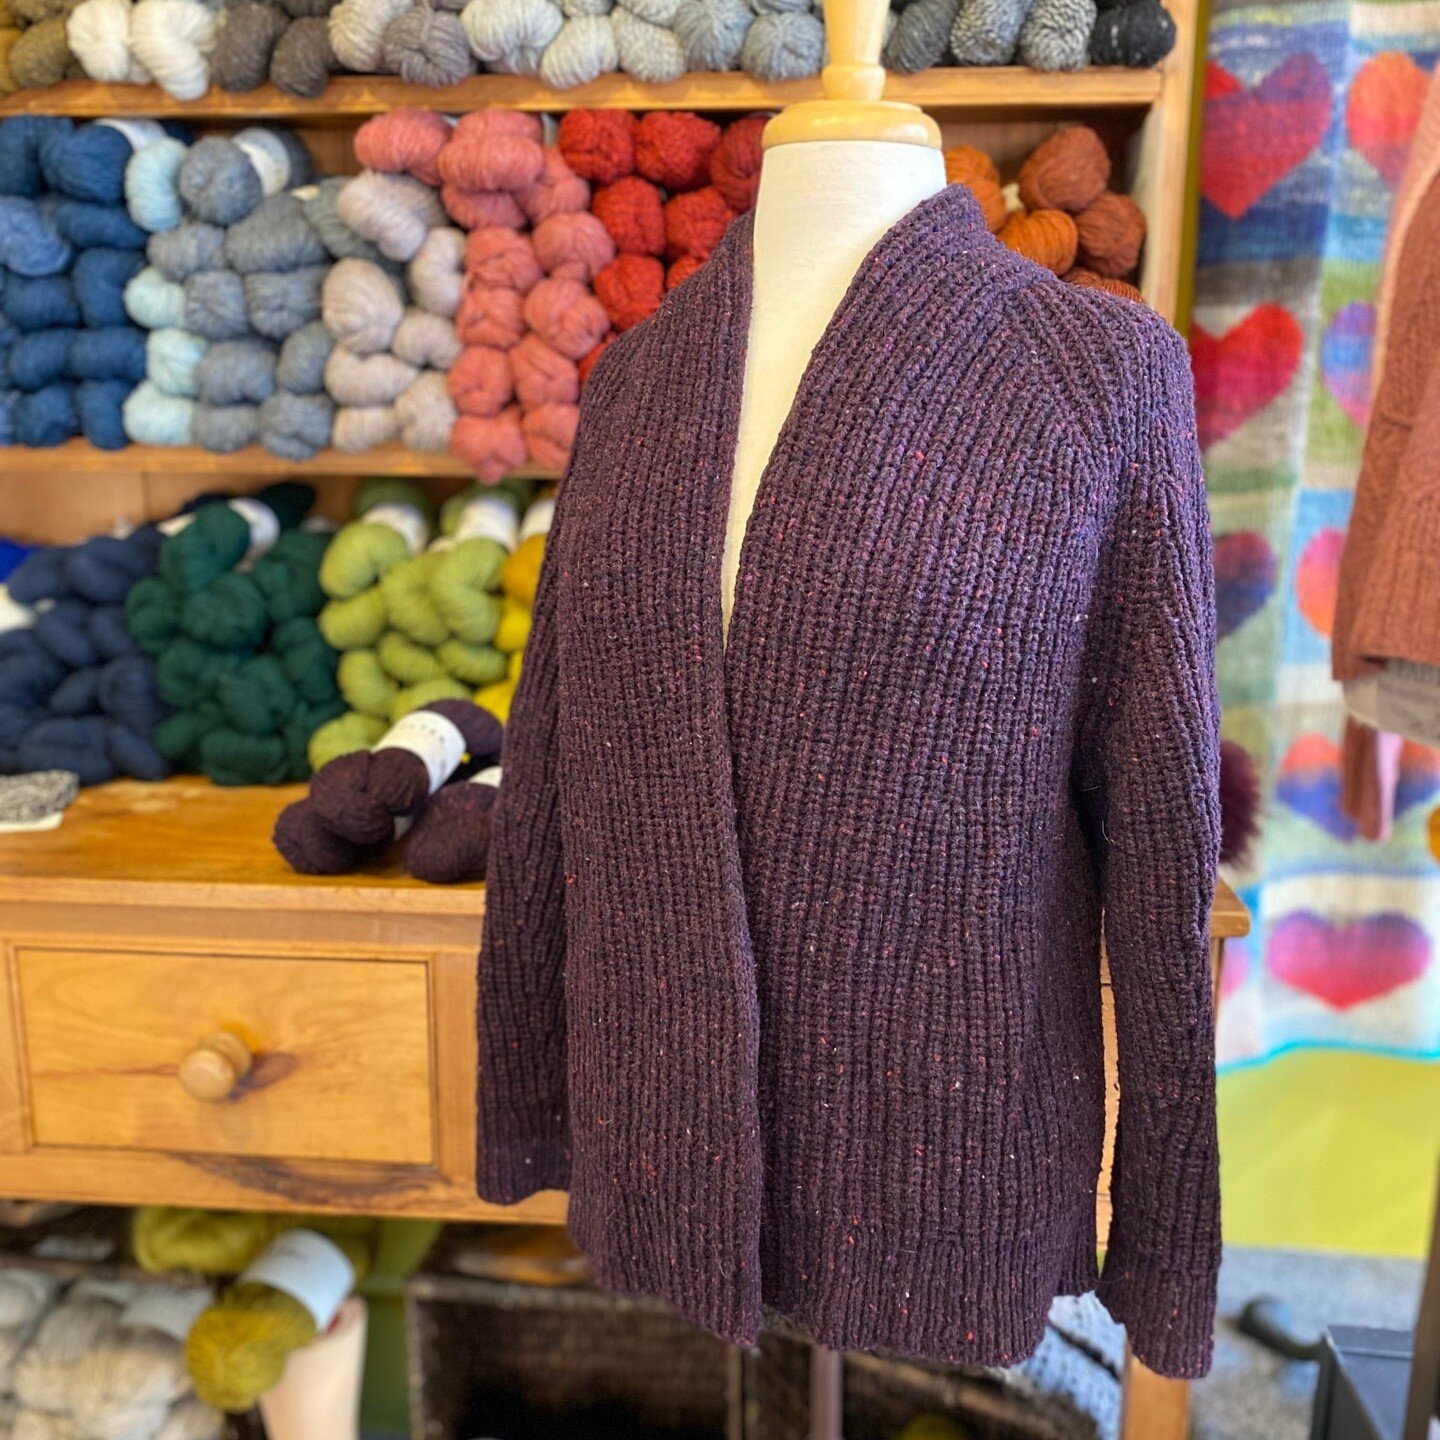 We have a sample of one of our Fall KAL patterns, The Reading Cardigan from @brooklyntweed , in the store now. If you were thinking about joining in come see our sample and let us help you pick the perfect yarn! We are featuring Shelter, Tones, and I